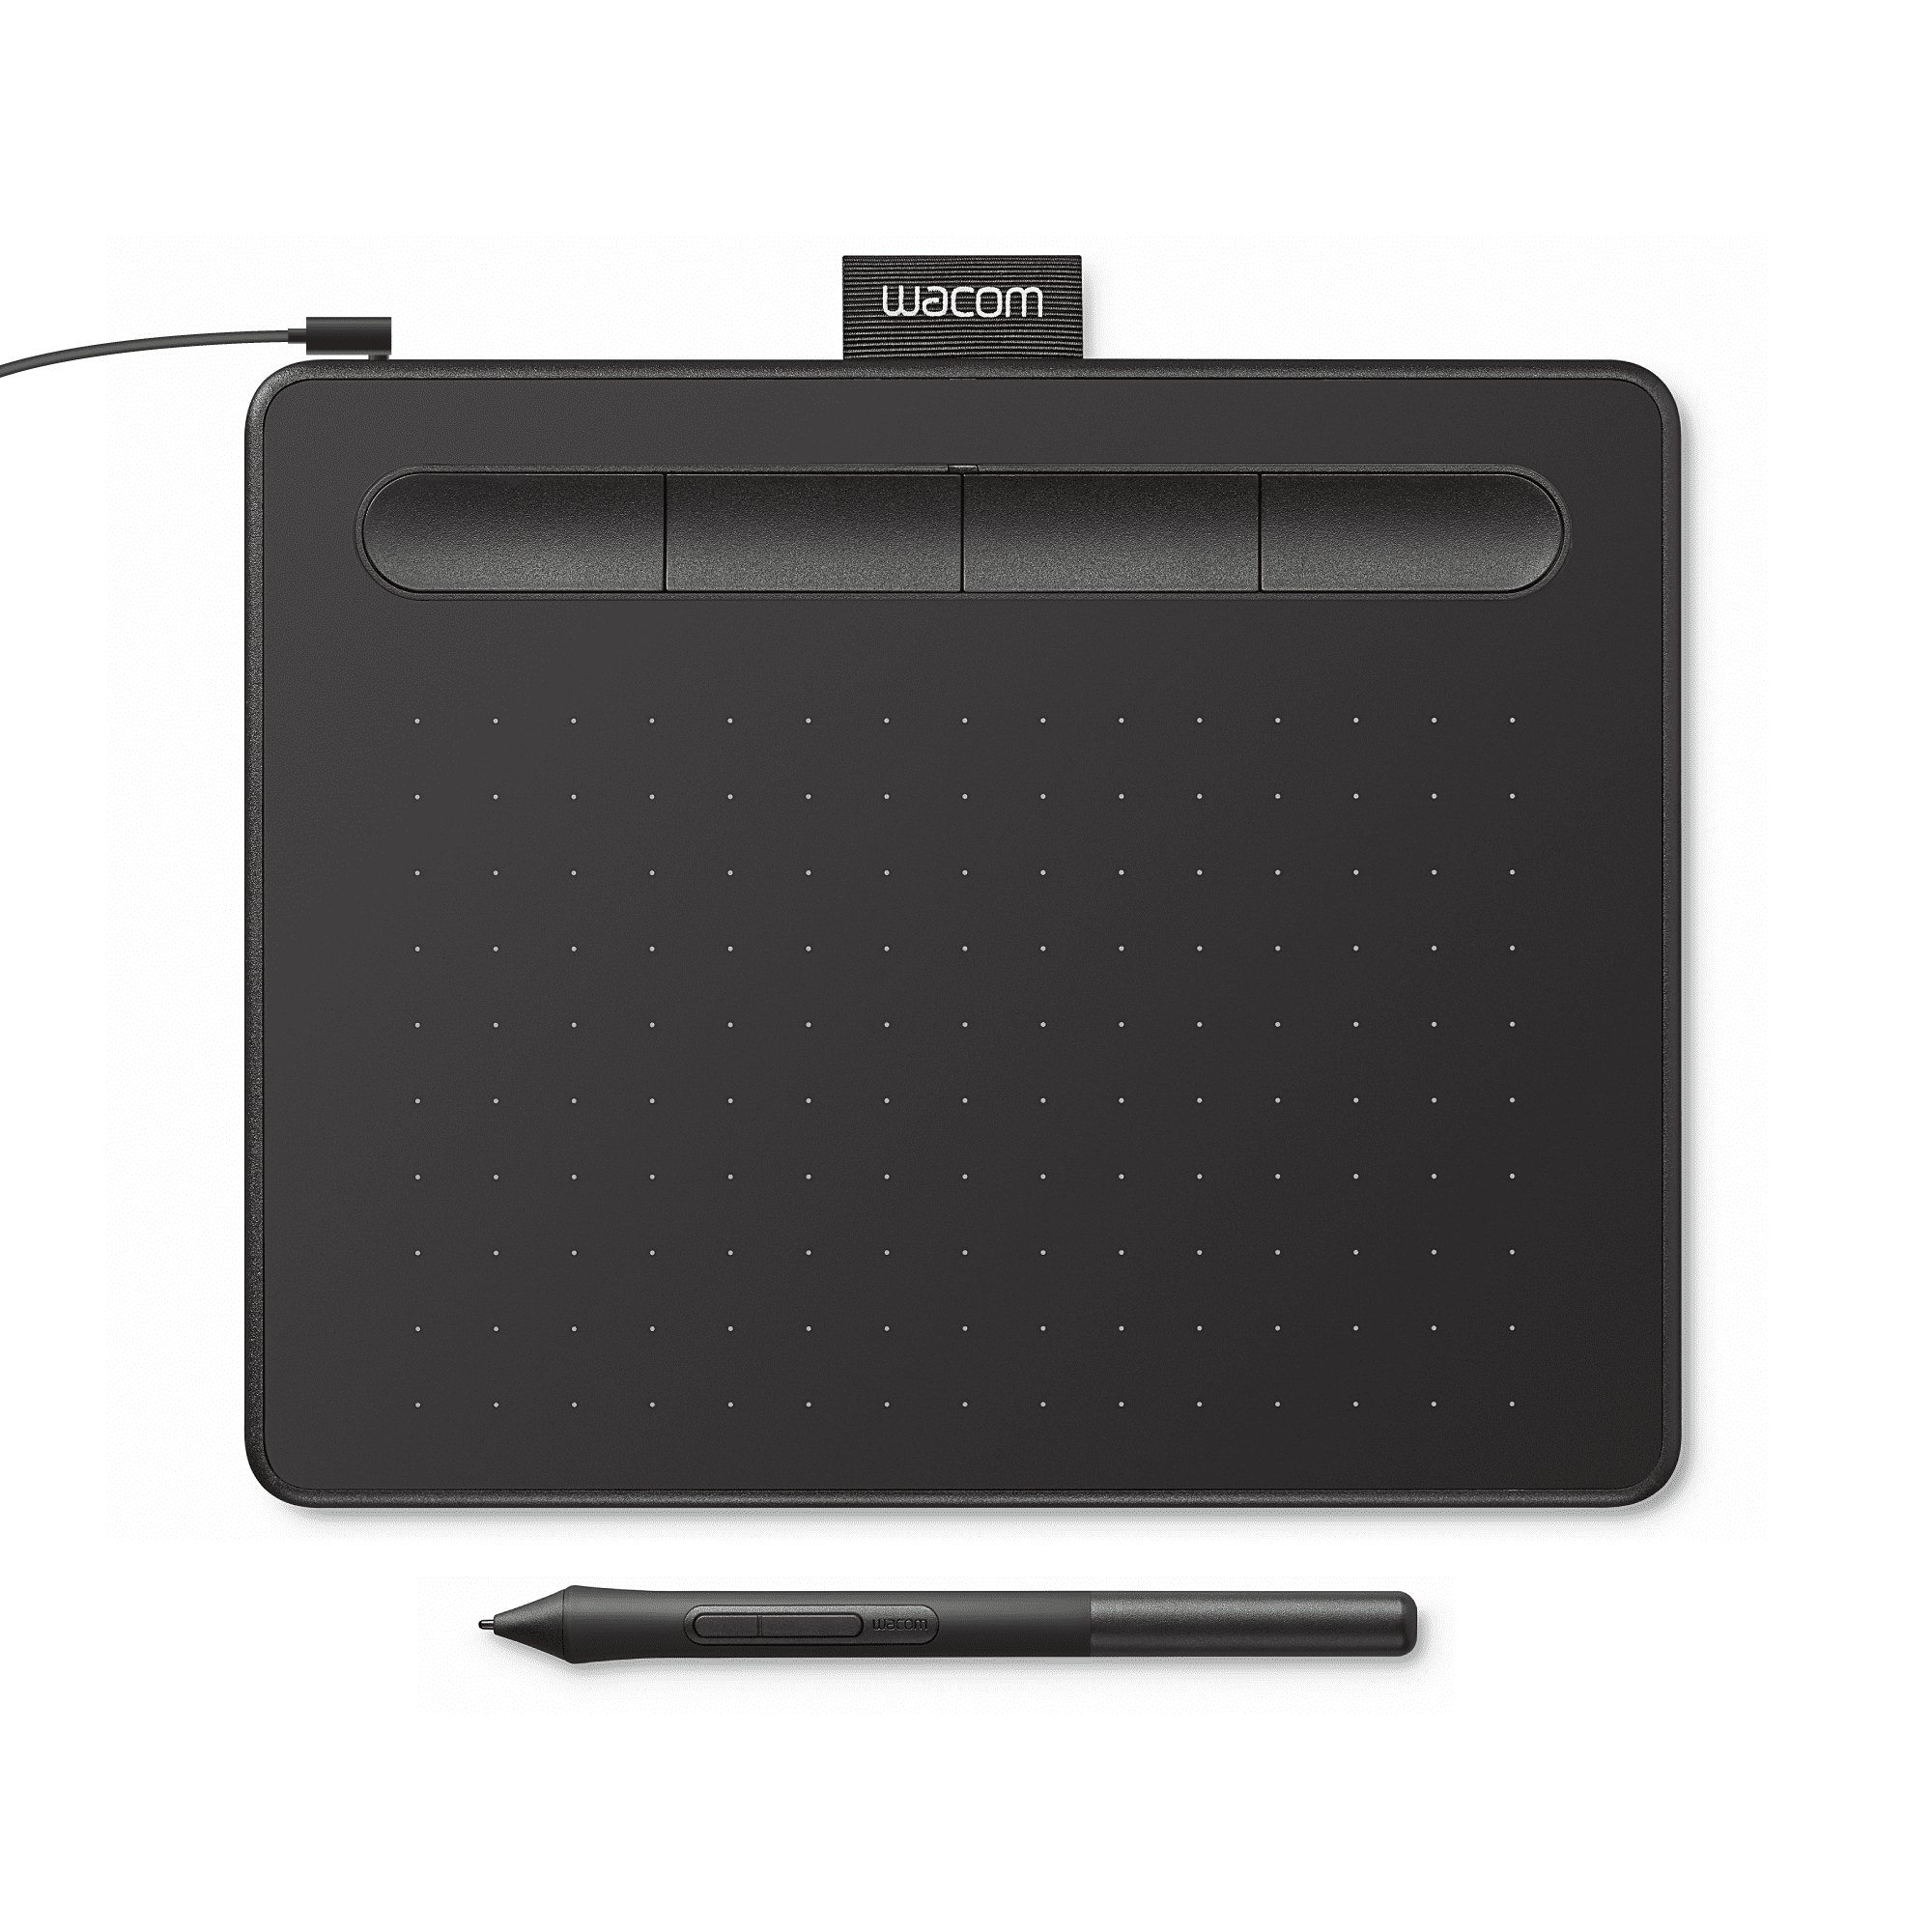 Wacom drawing tablets track the name and time everytime you open an app